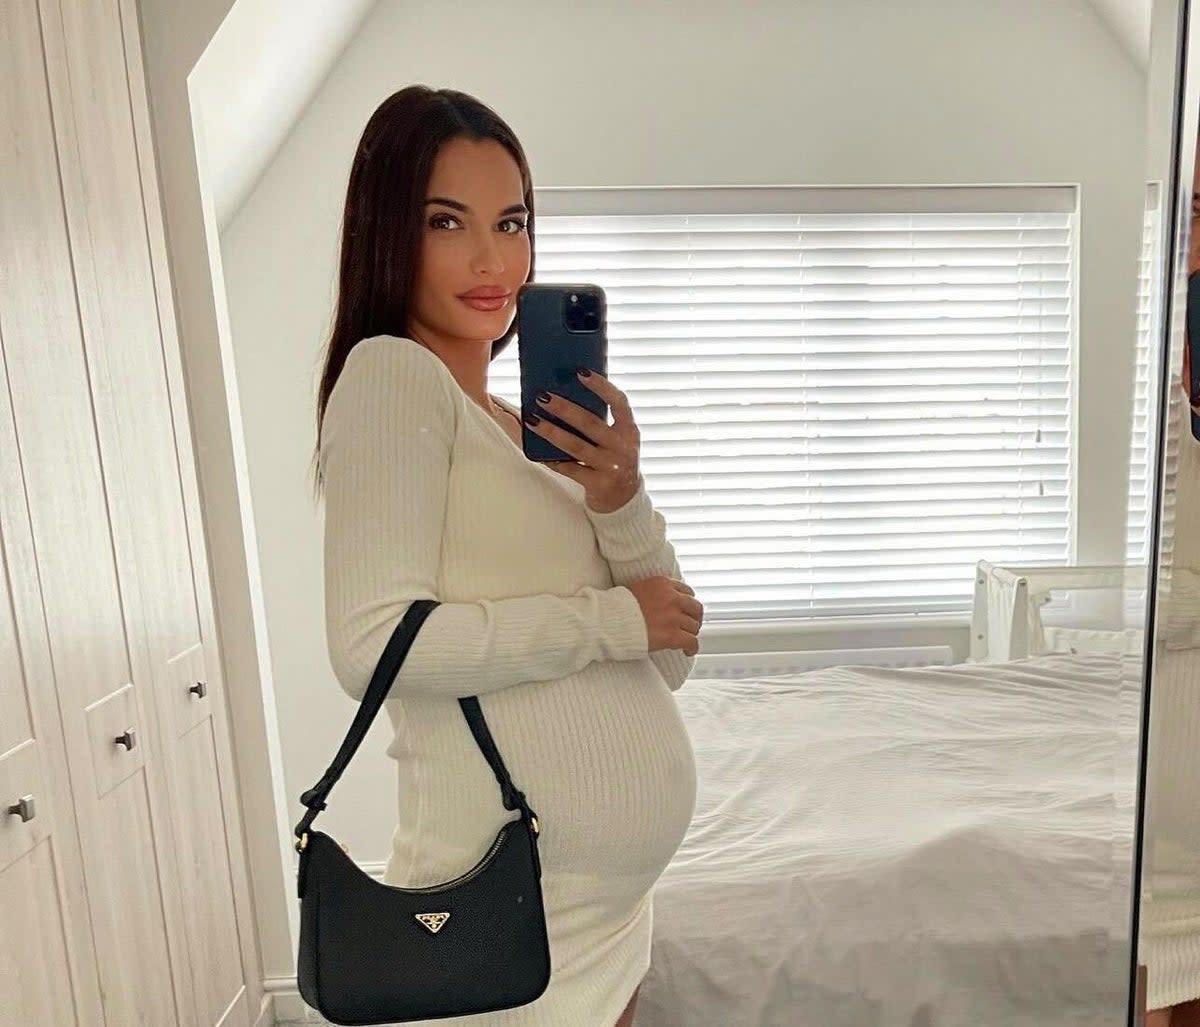 Bass welcomed her second child and shared the news with fans and friends on Instagram   (Nicole Bass Instragram )